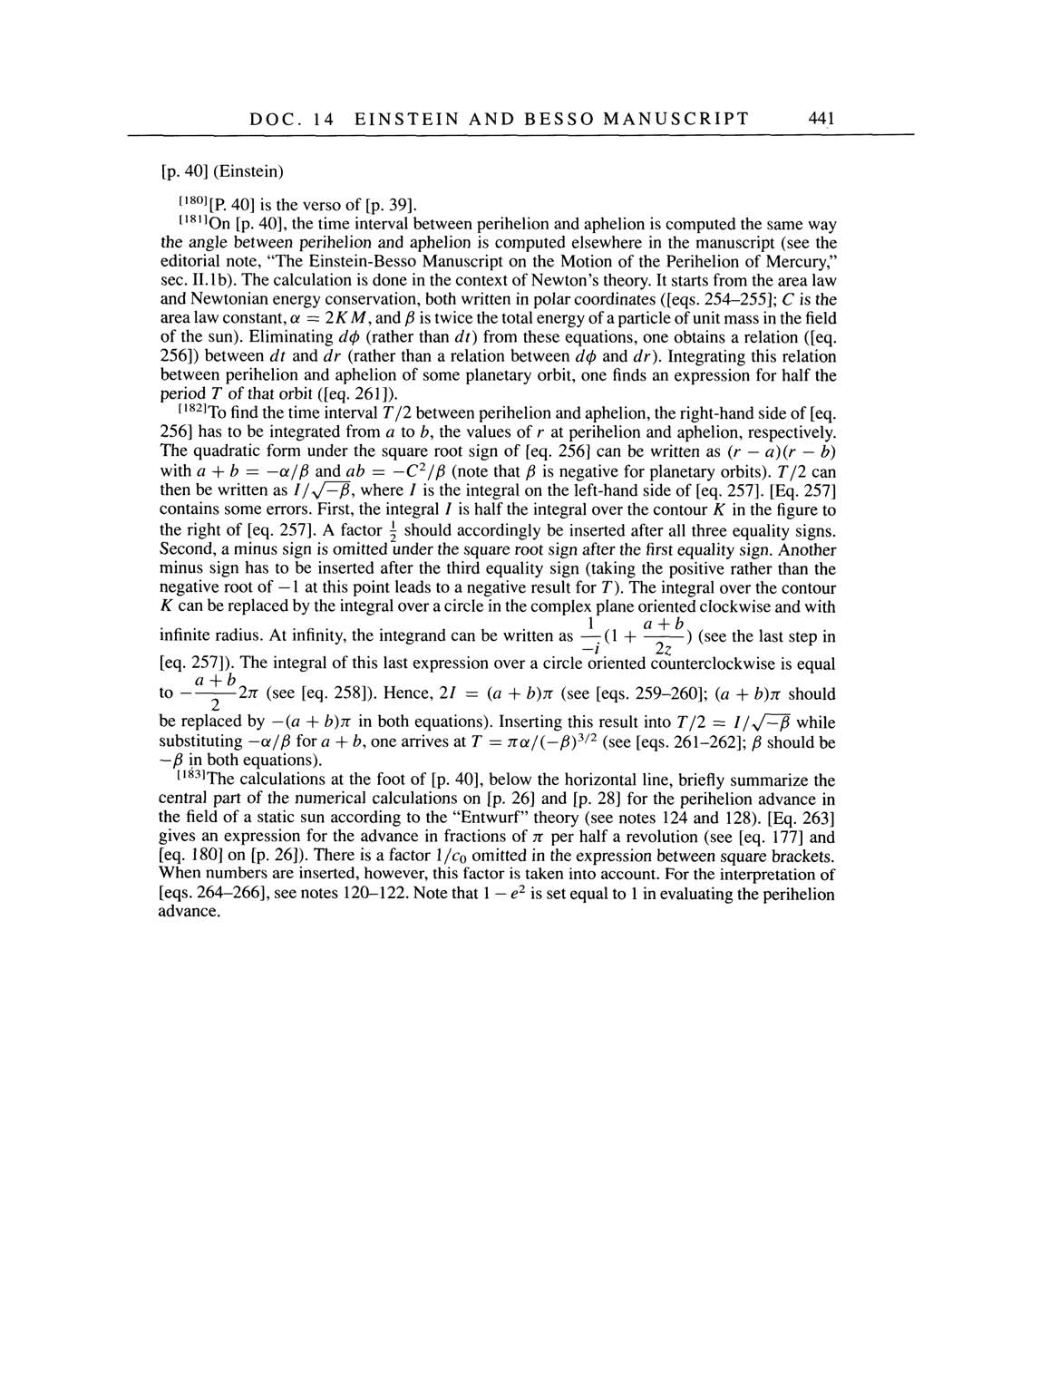 Volume 4: The Swiss Years: Writings 1912-1914 page 441